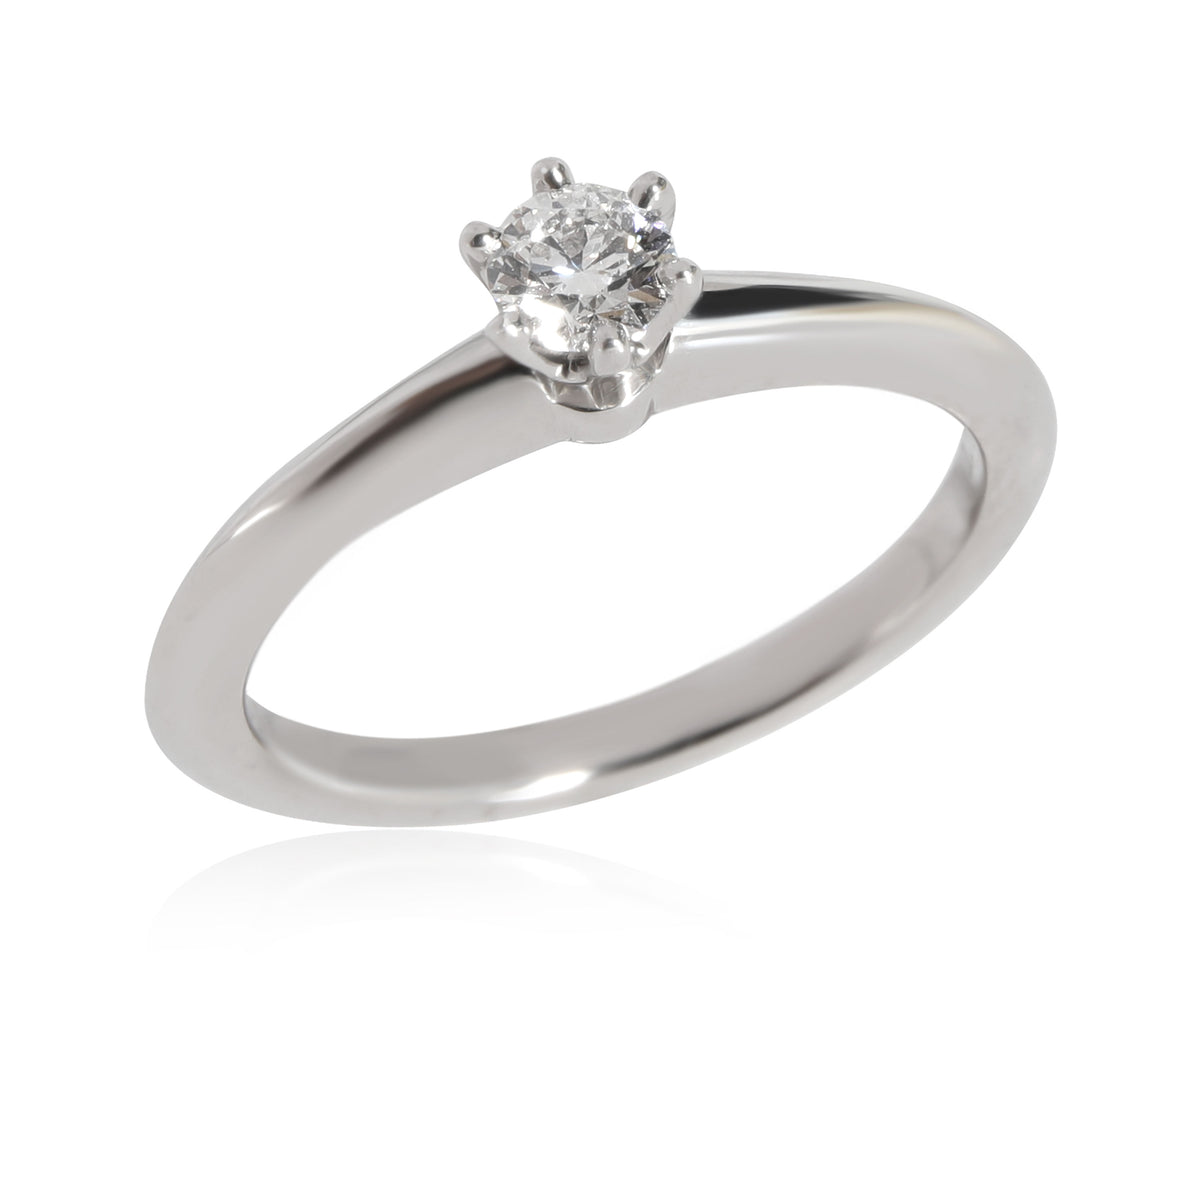 Tiffany & Co. Diamond Solitaire Engagement Ring in Platinum G VS1 0.21 CTW